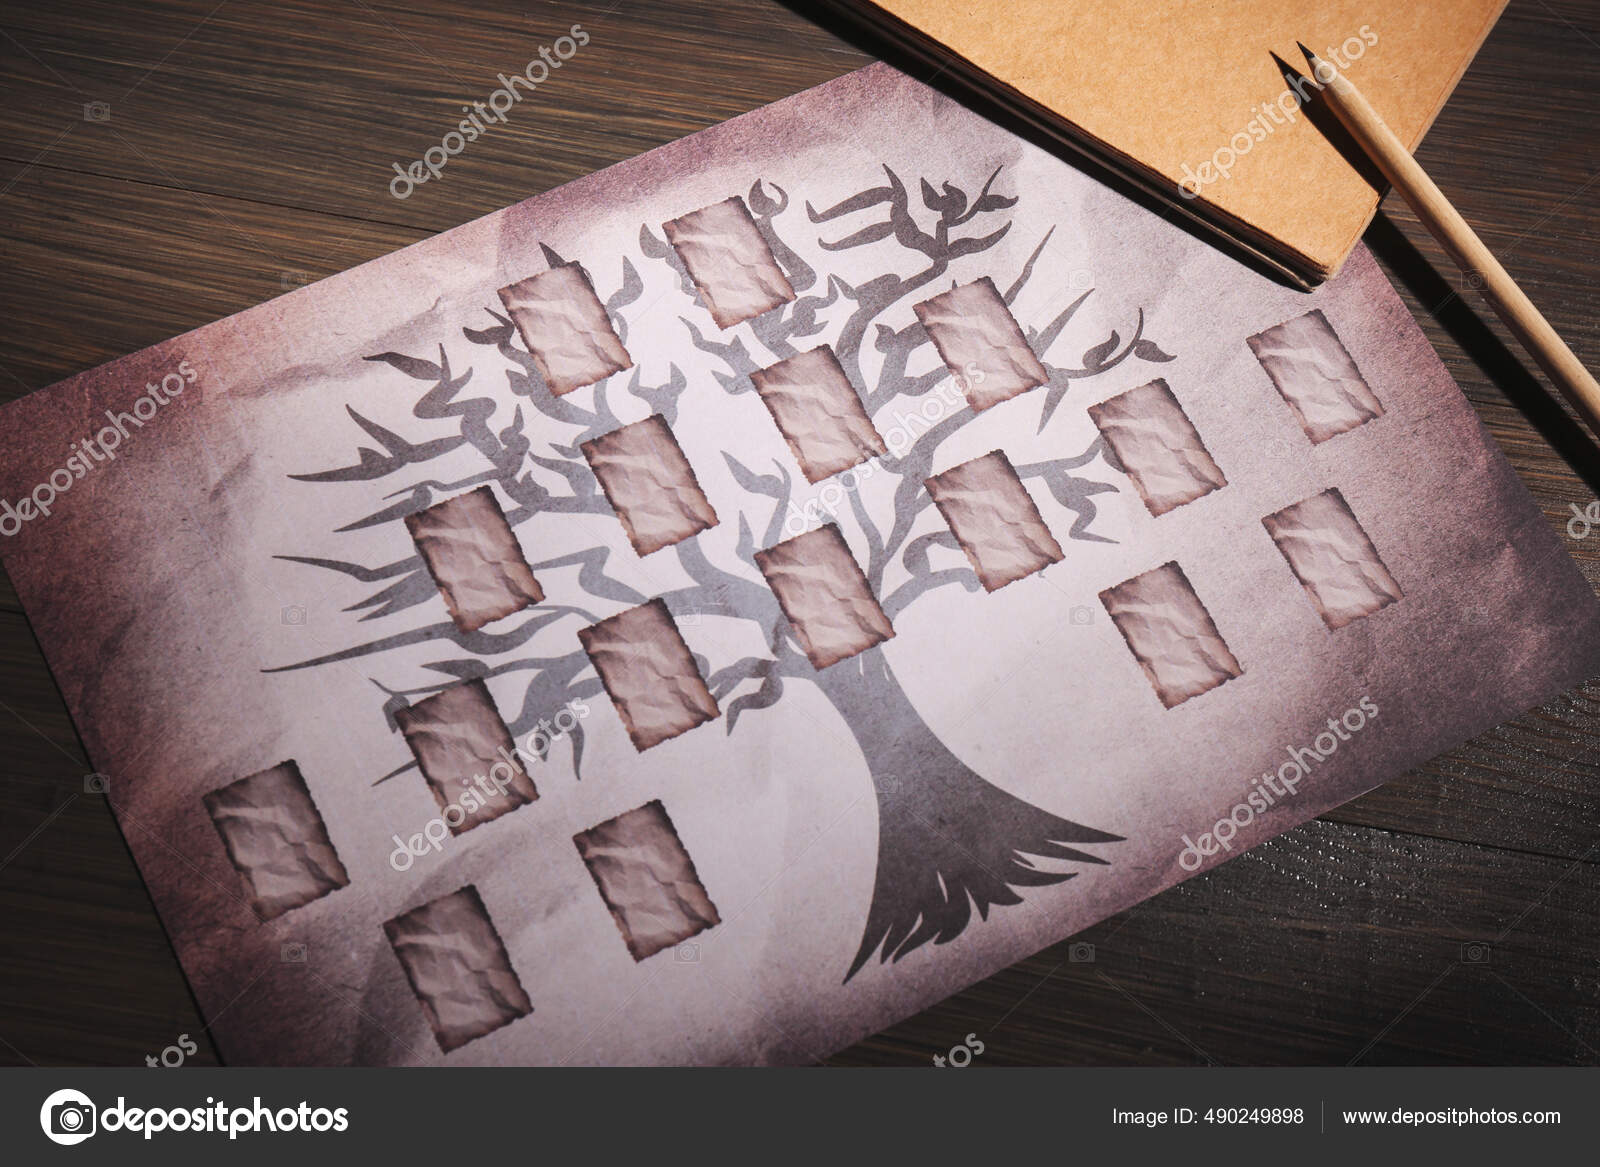 Blank Family Tree Notebook Pencil Wooden Table Stock Photo by ©NewAfrica  490249898